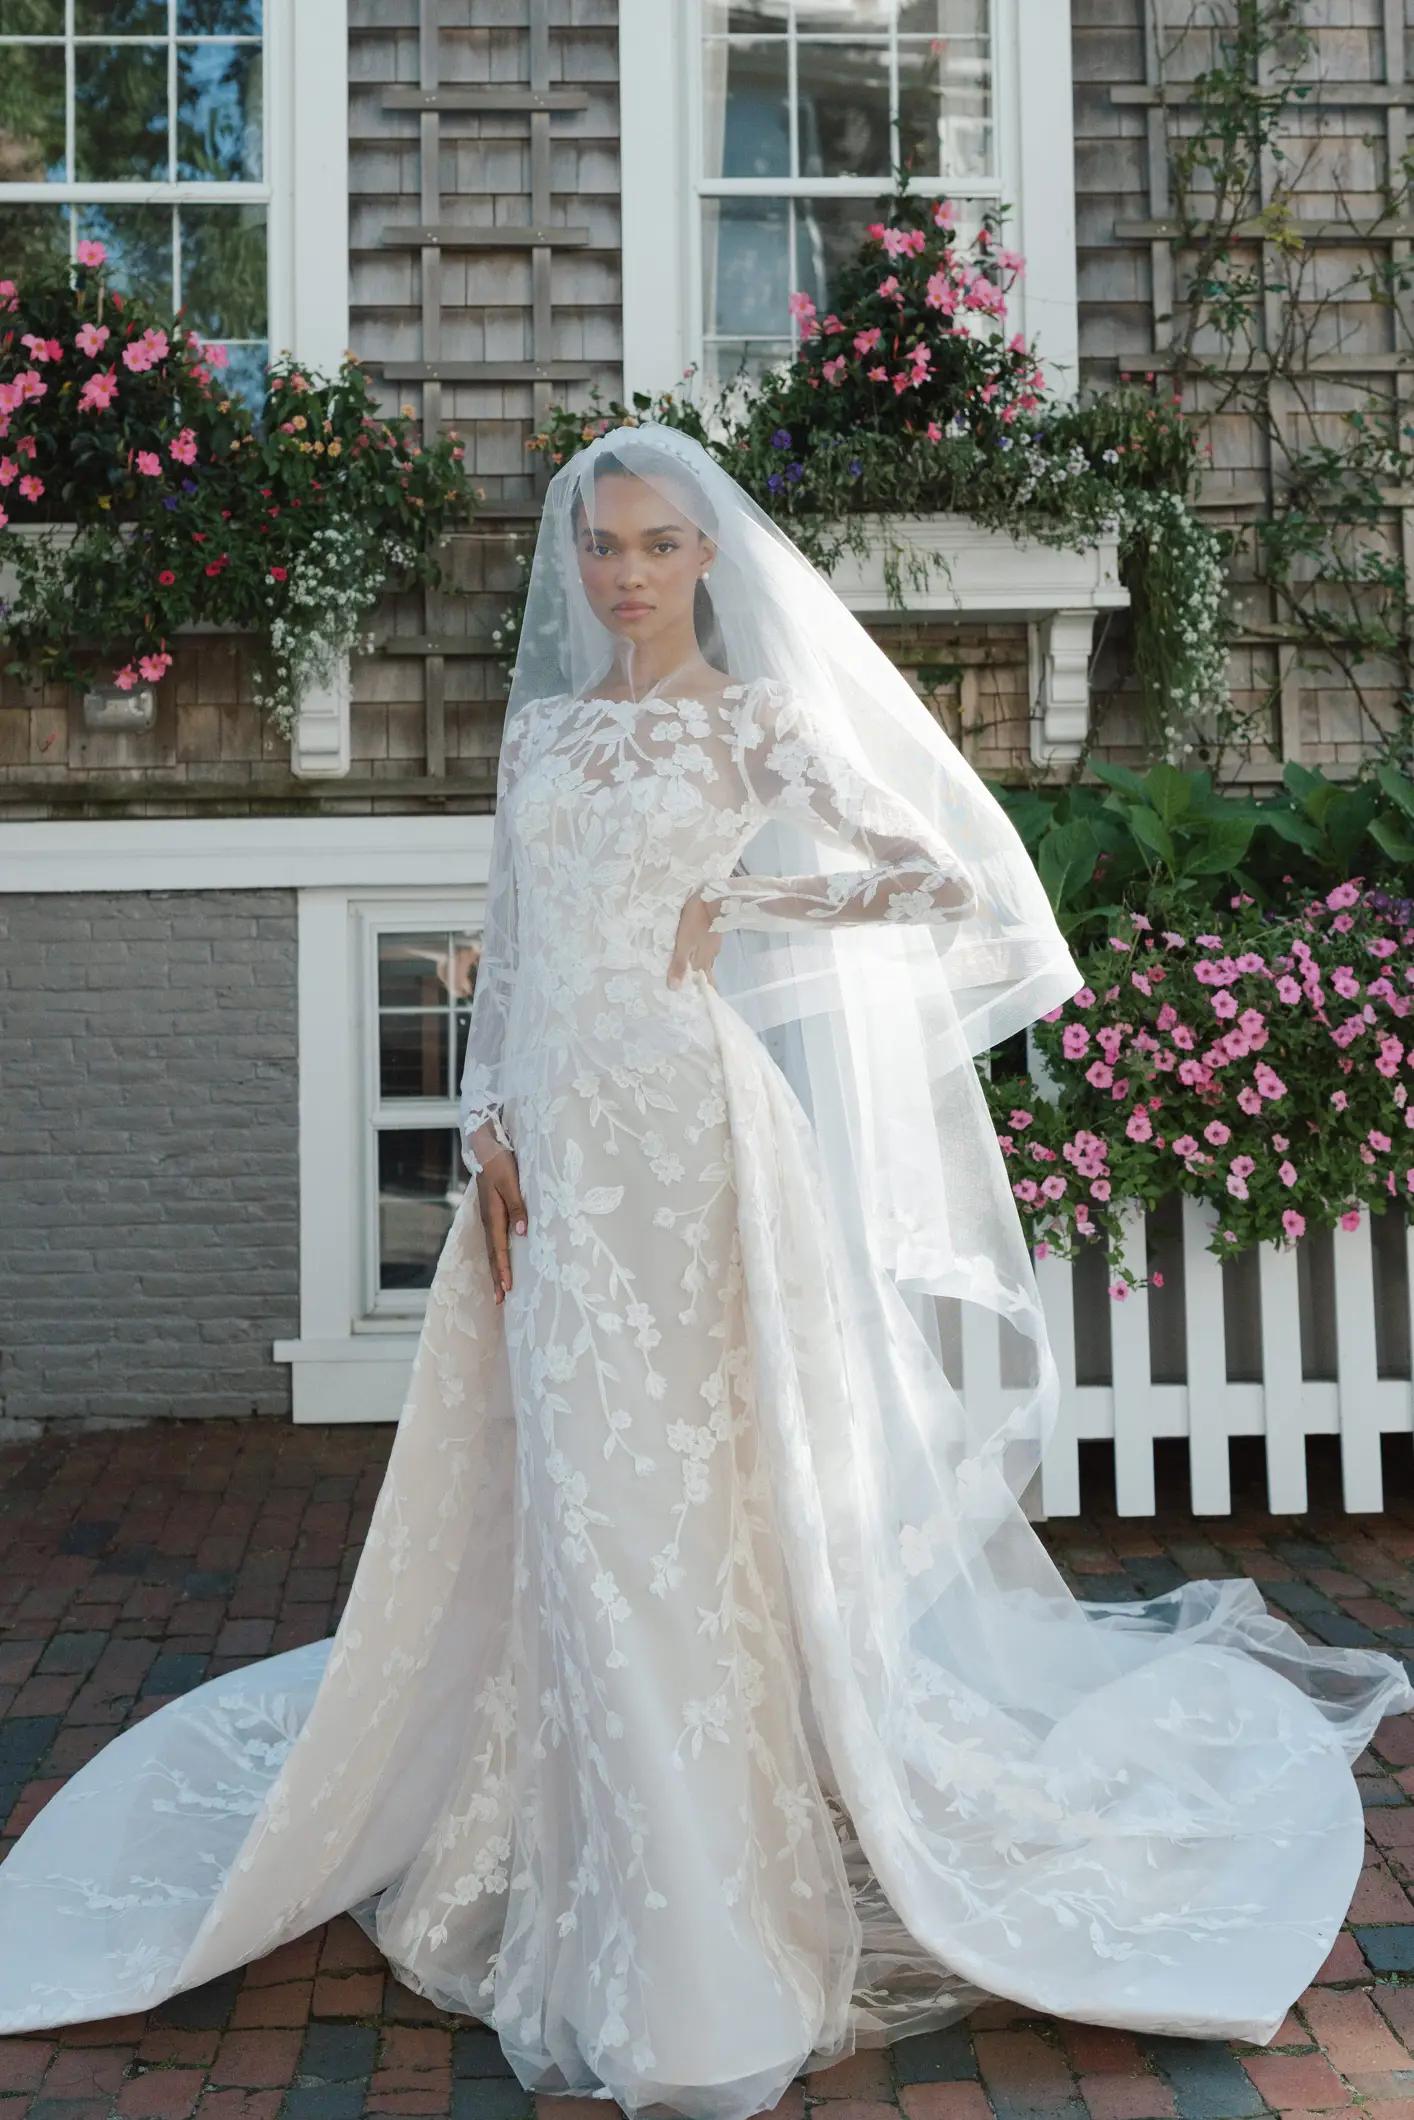 Stunning Millie wedding dress by Anne Barge Blue Willow with floral detail high neck sleeves and detachable train